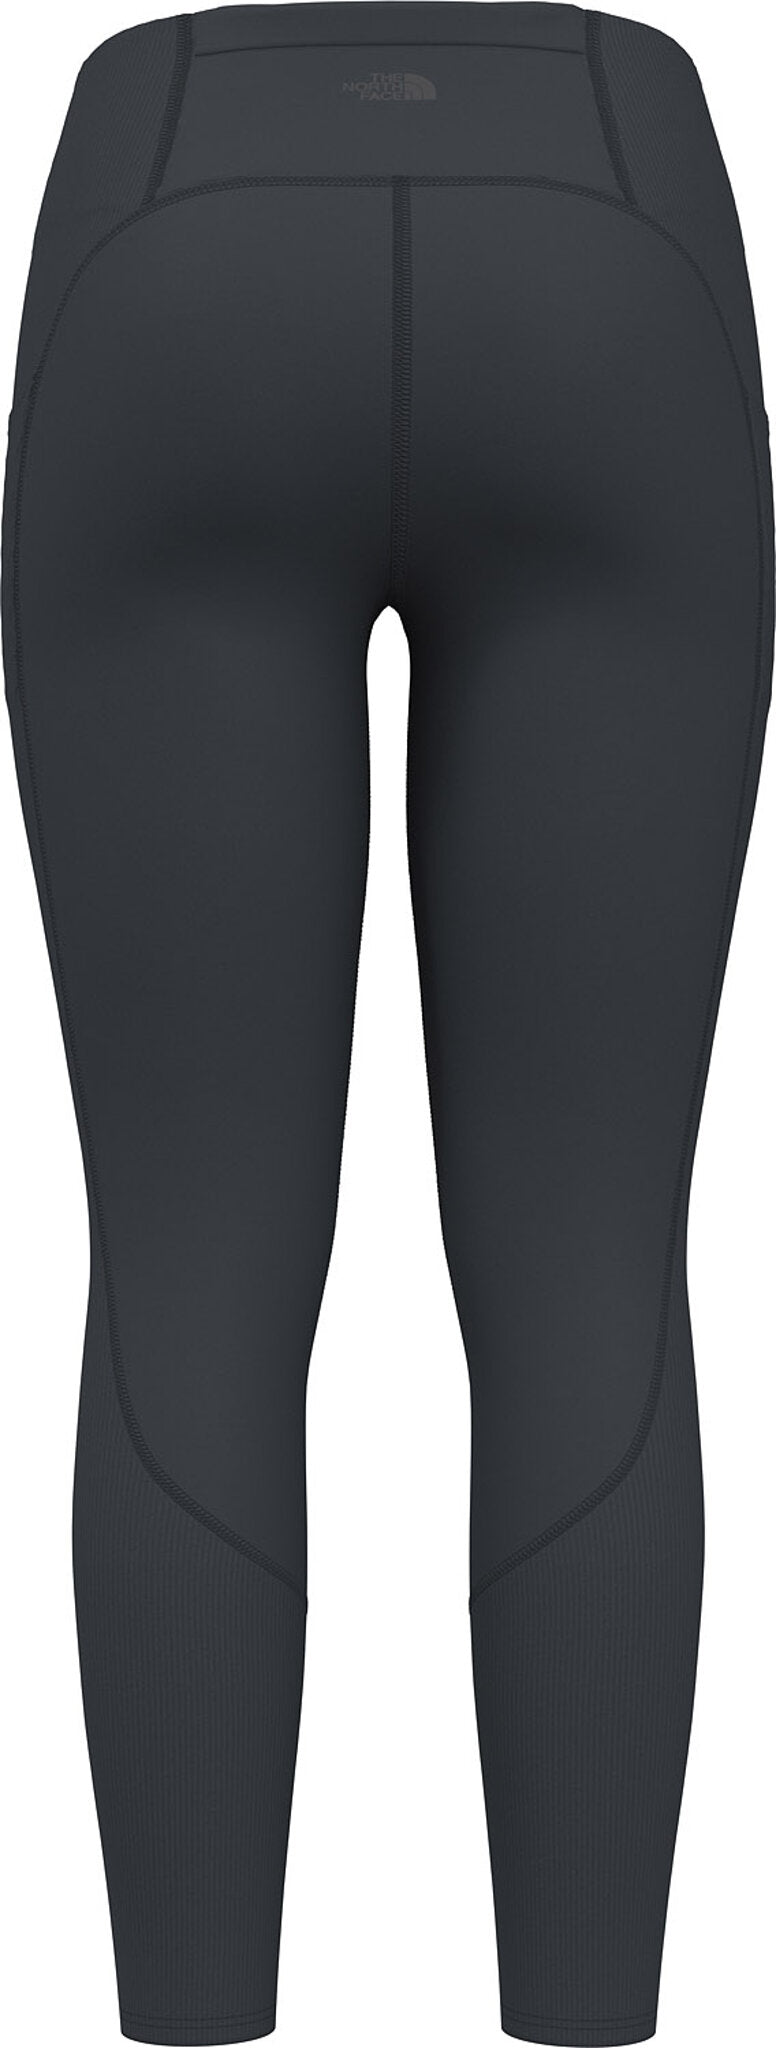 THE NORTH FACE EA Dune Sky Duet Tight - Women's